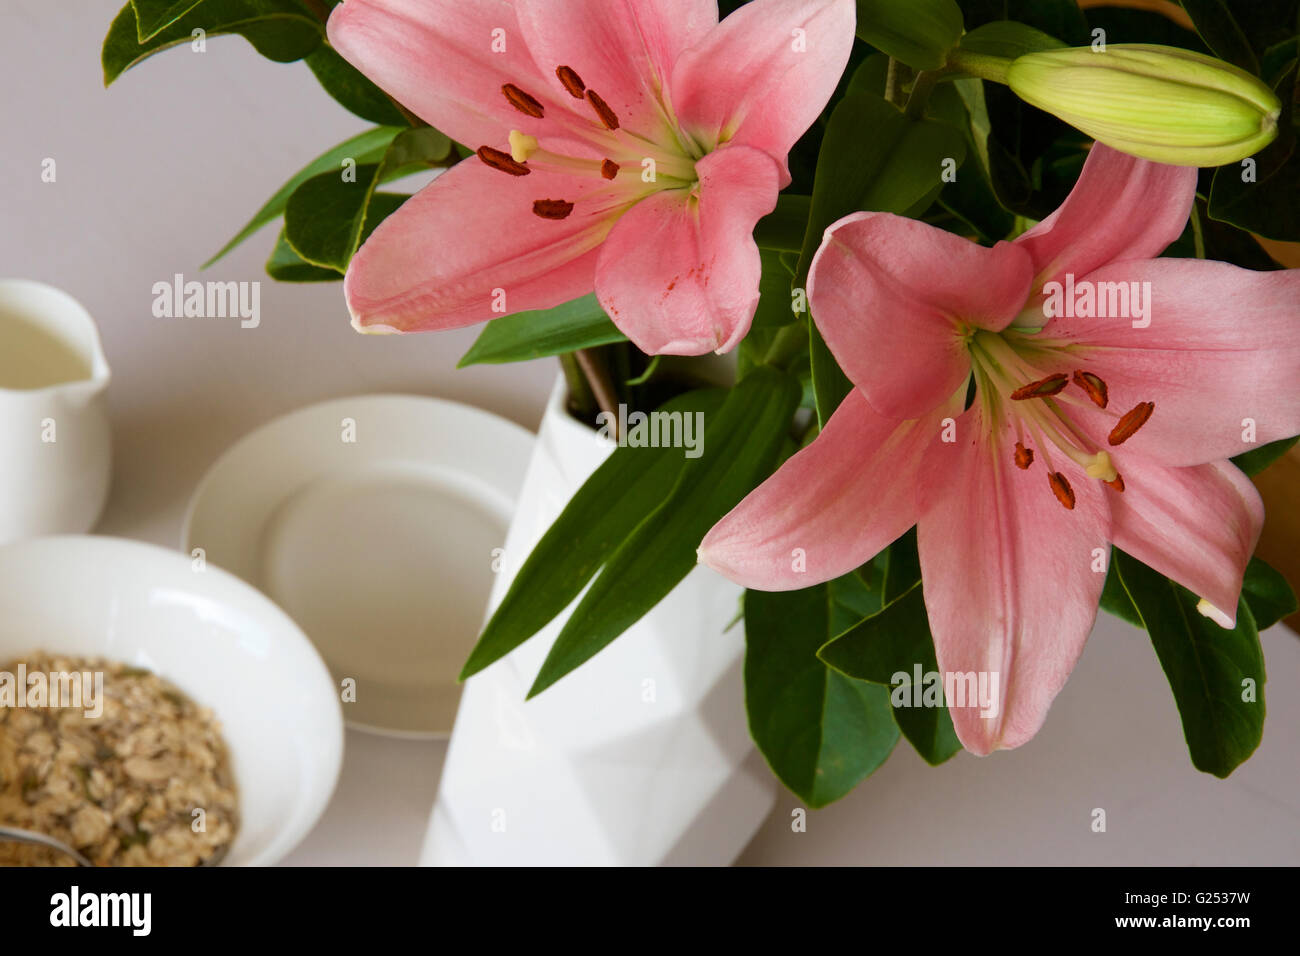 Pink lily at breakfast. Stock Photo